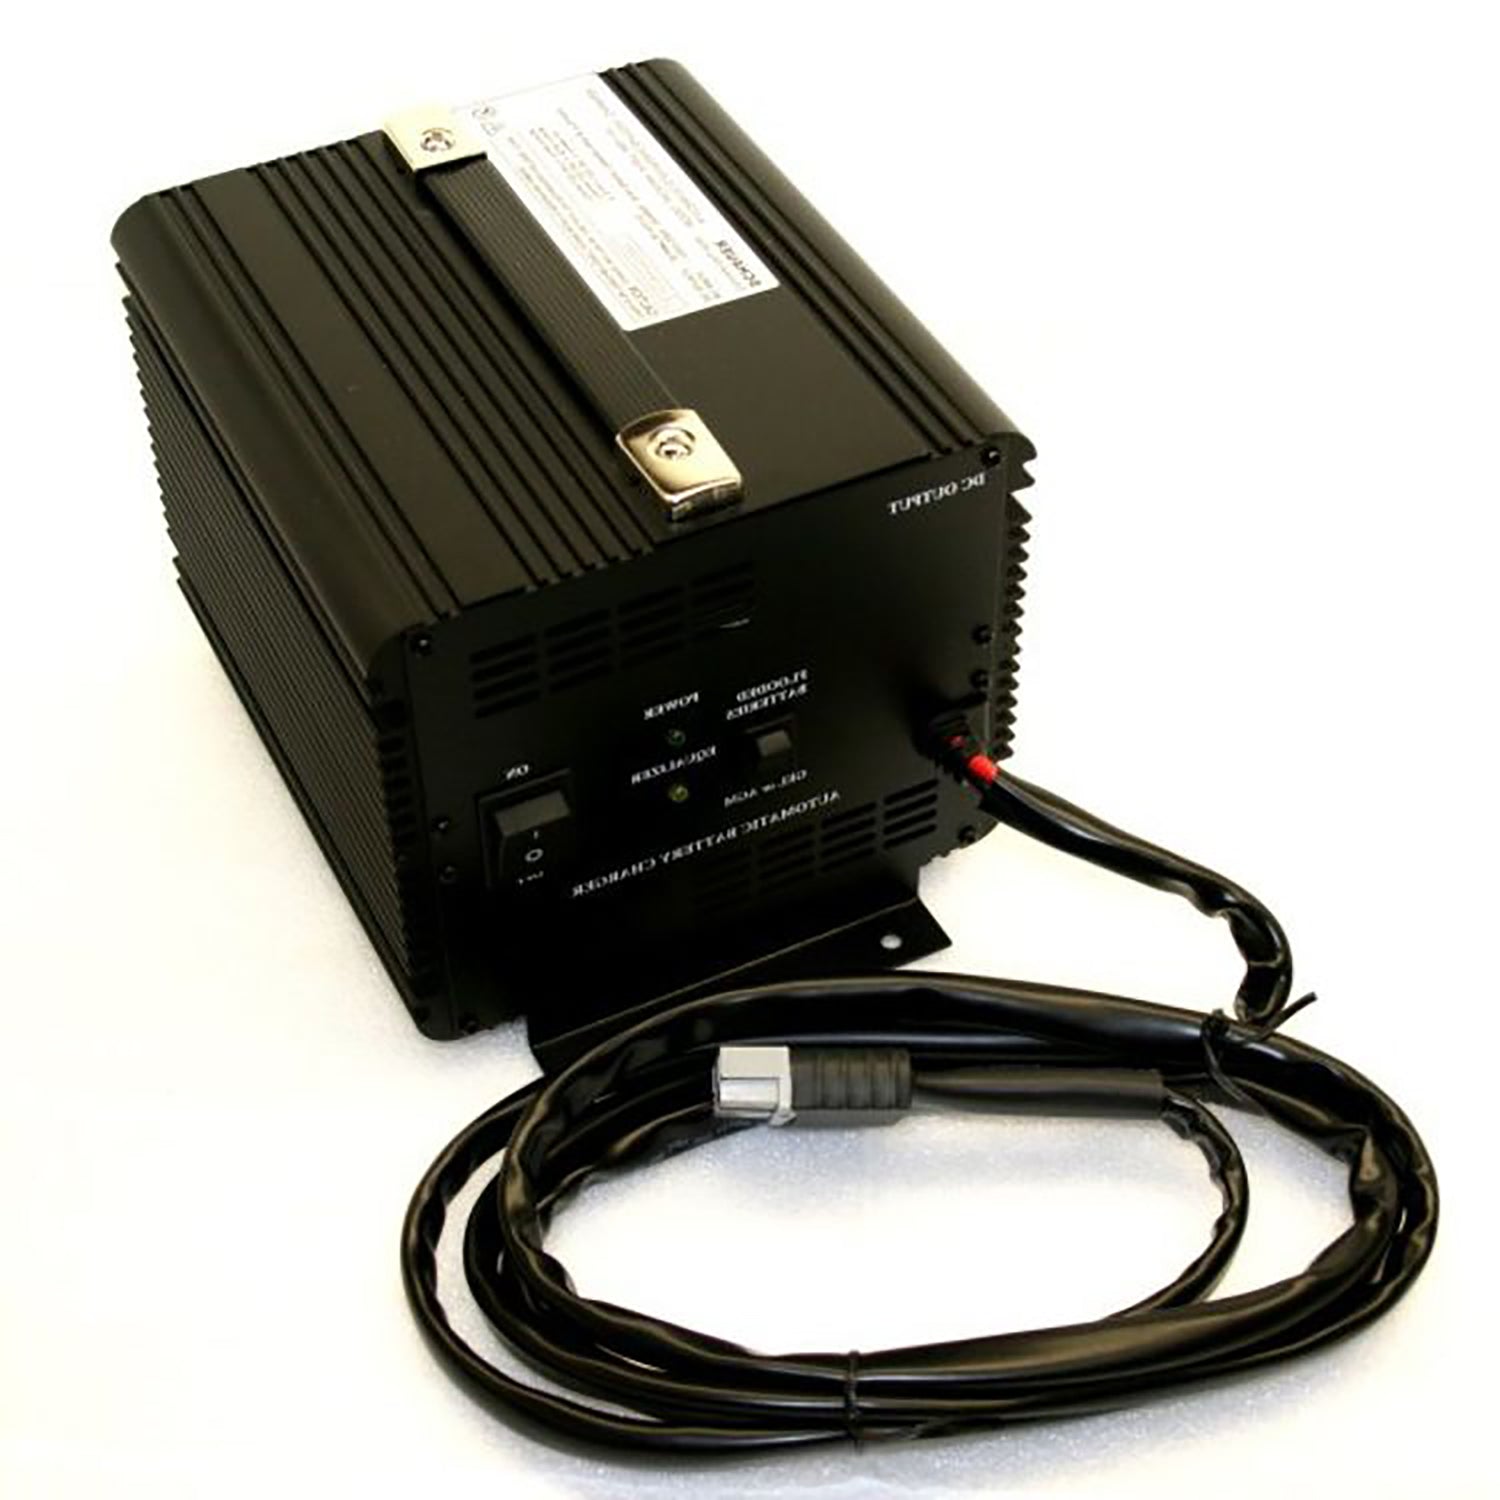 48V 15AMP CHARGER, COMES WITH PLUG INCLUDED BATTERY CHARGER